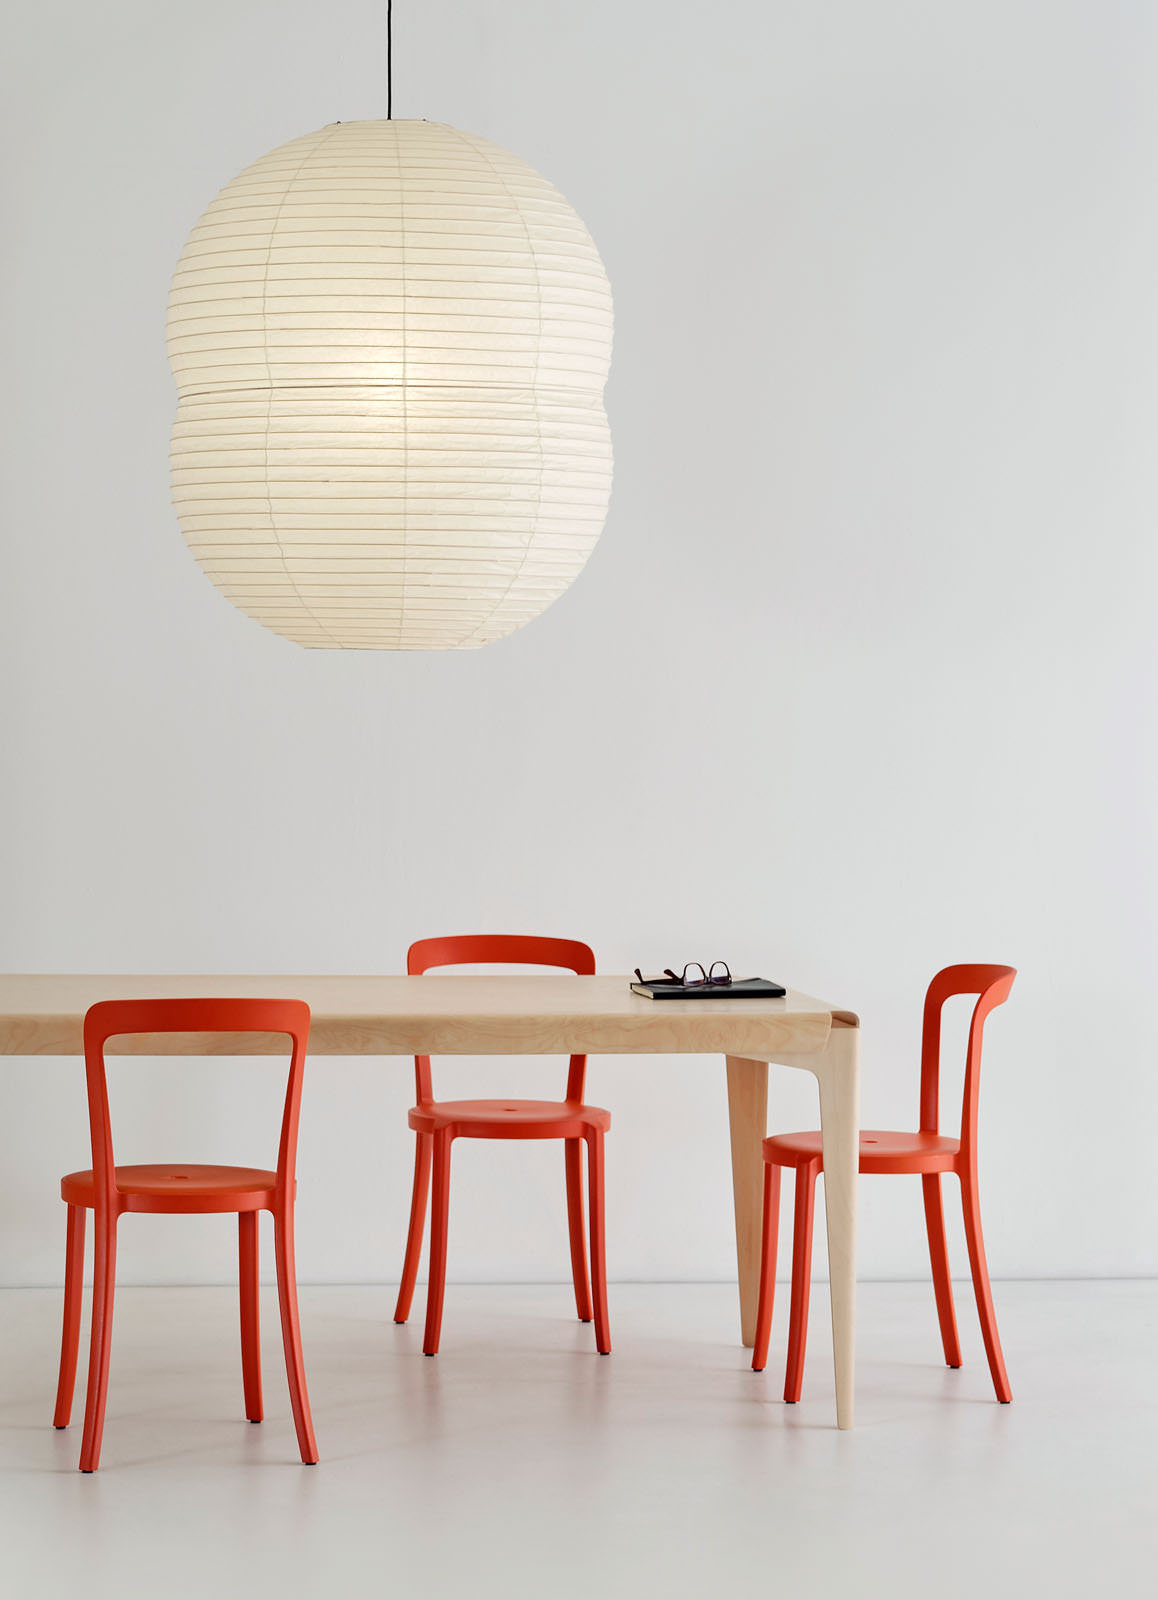 Barber Osgerby table chair and lantern overhead lighting